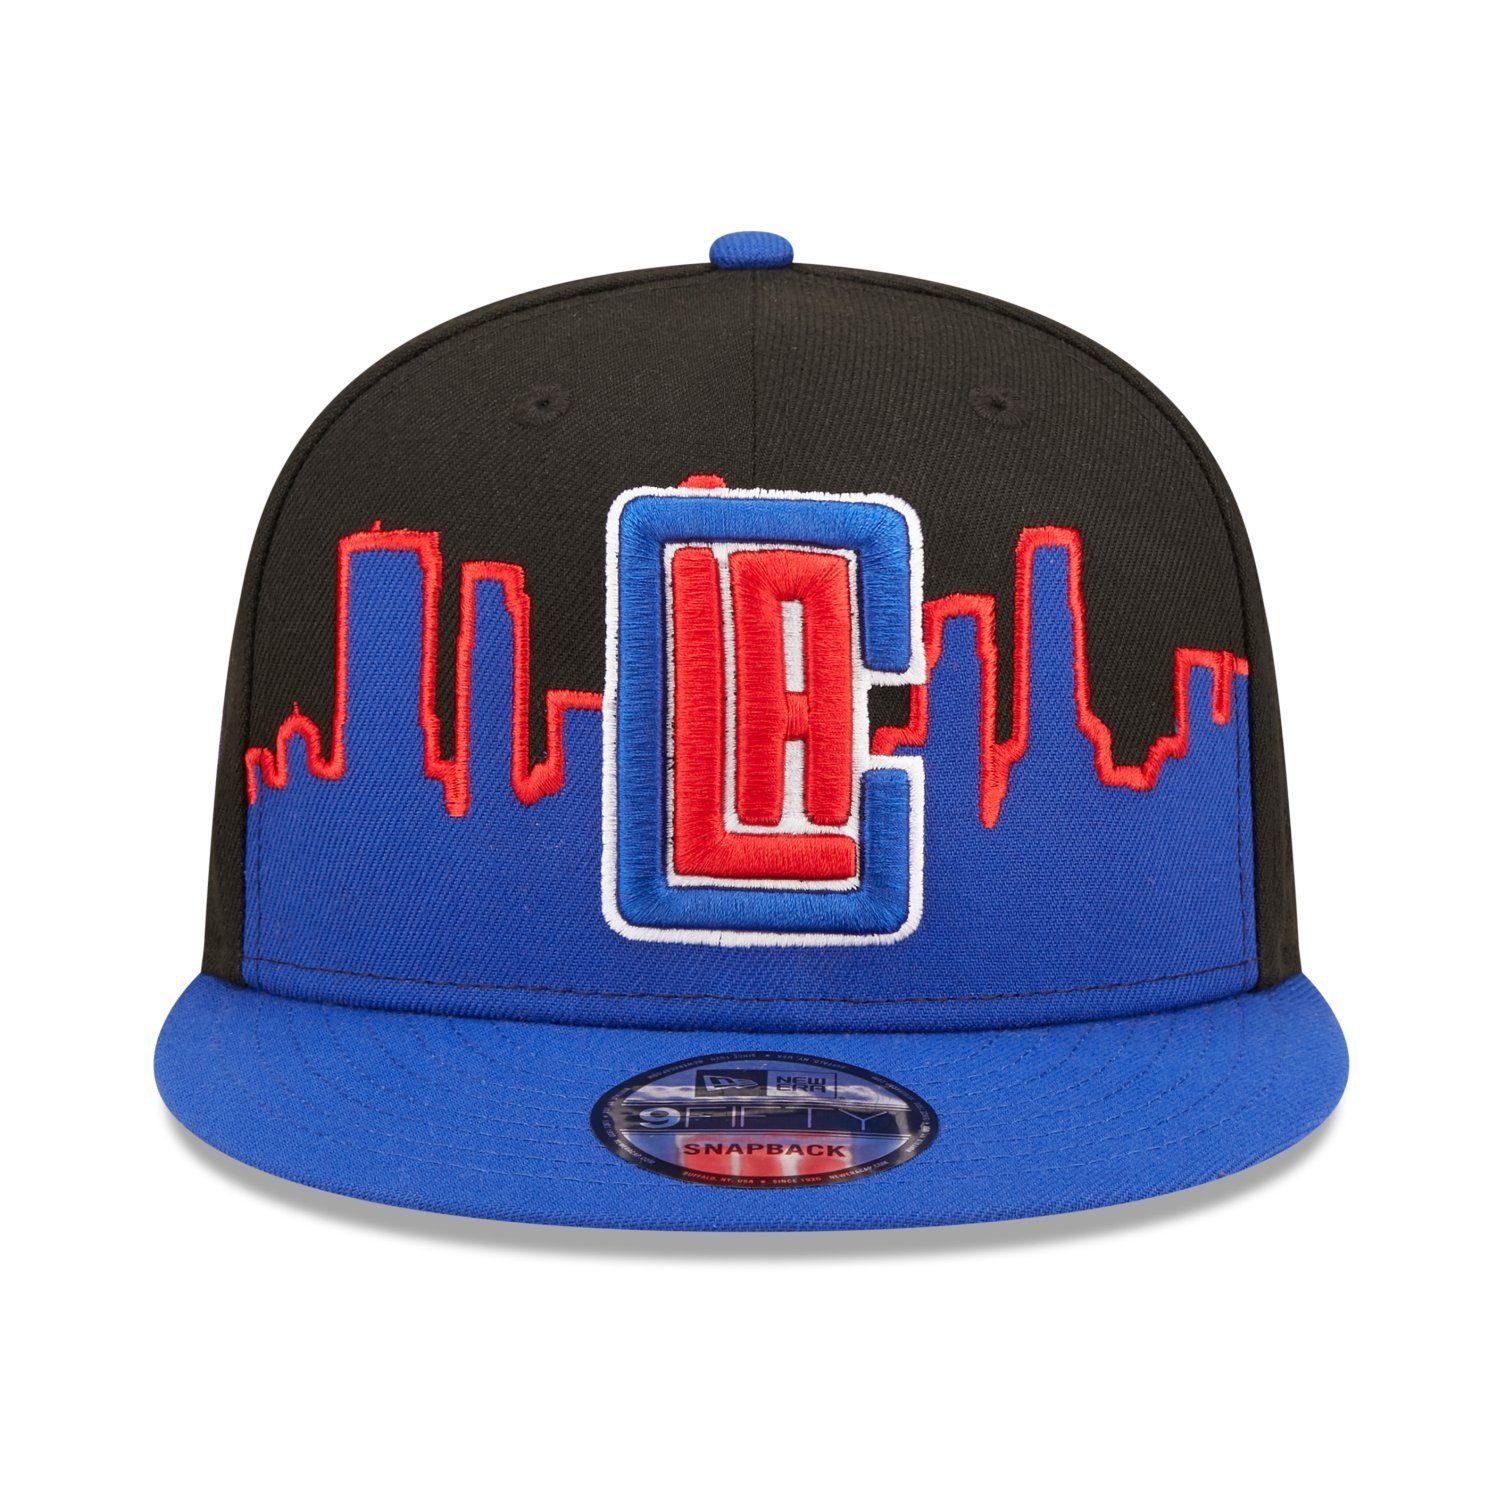 New Era Snapback Cap 9FIFTY Angeles Clippers TIPOFF Los